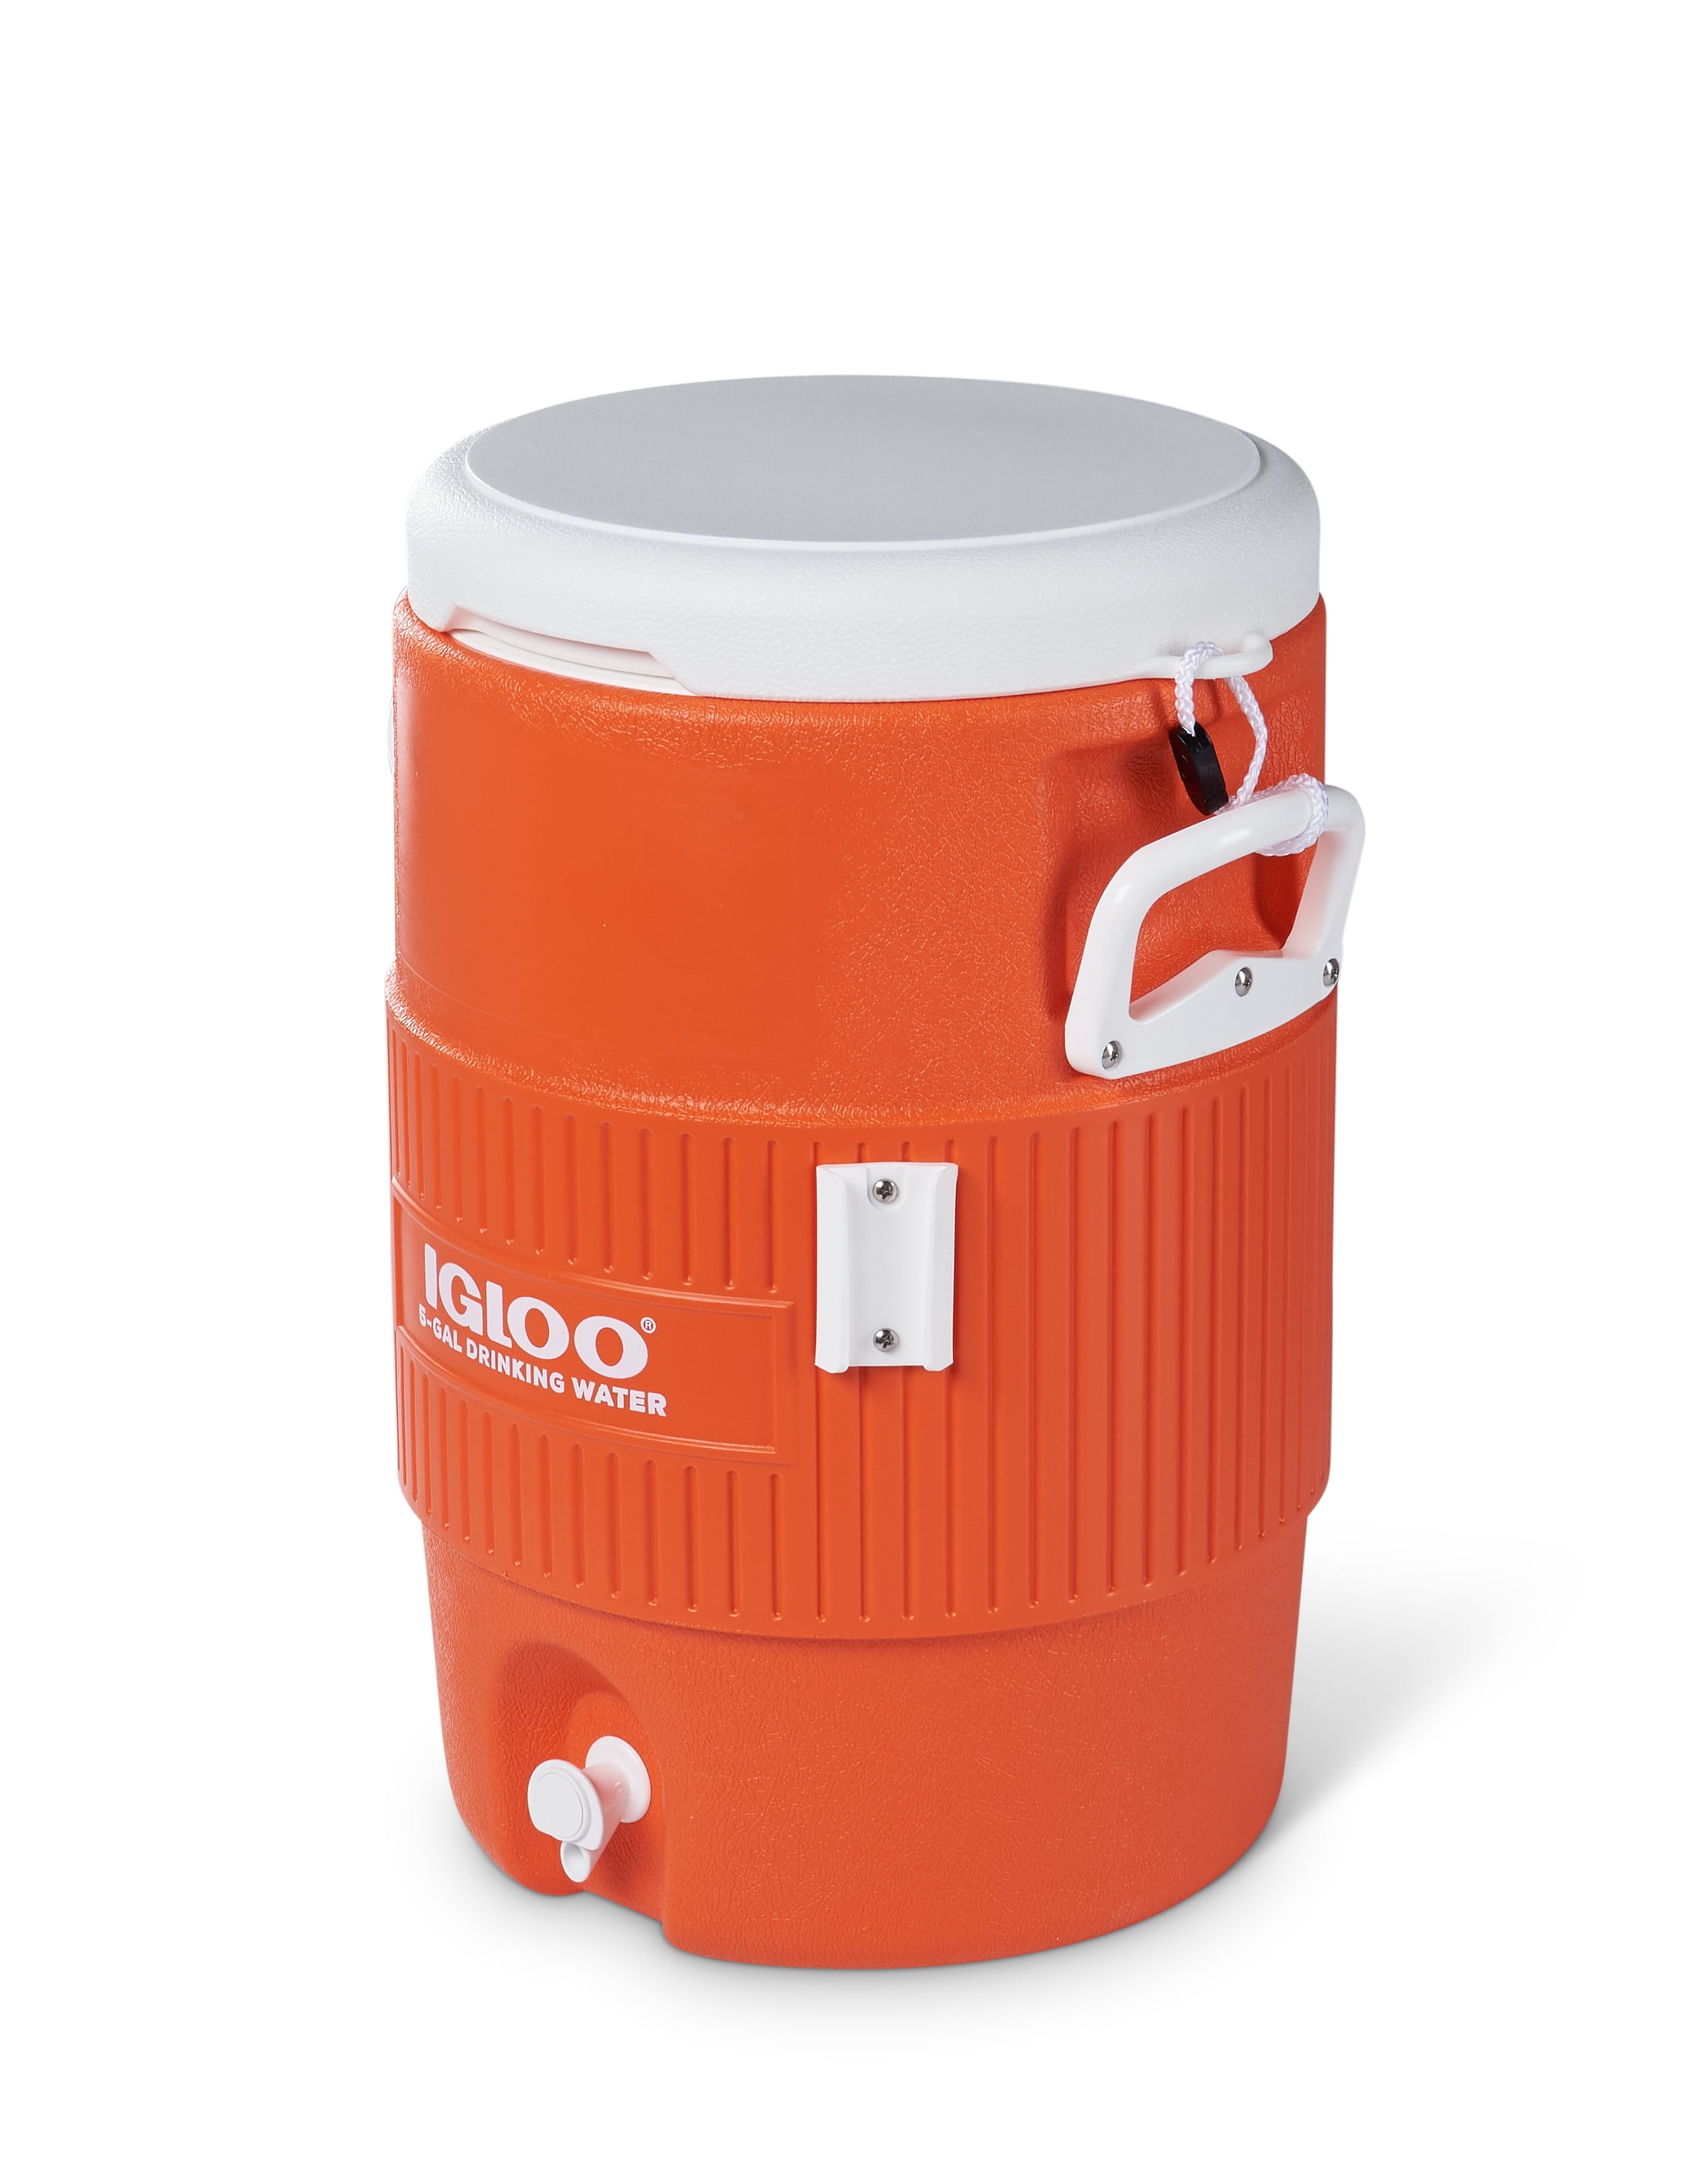 IGLOO Orange 5-Gallon Heavy-Duty Beverage Cooler Sports Camping Cold Water Jug 